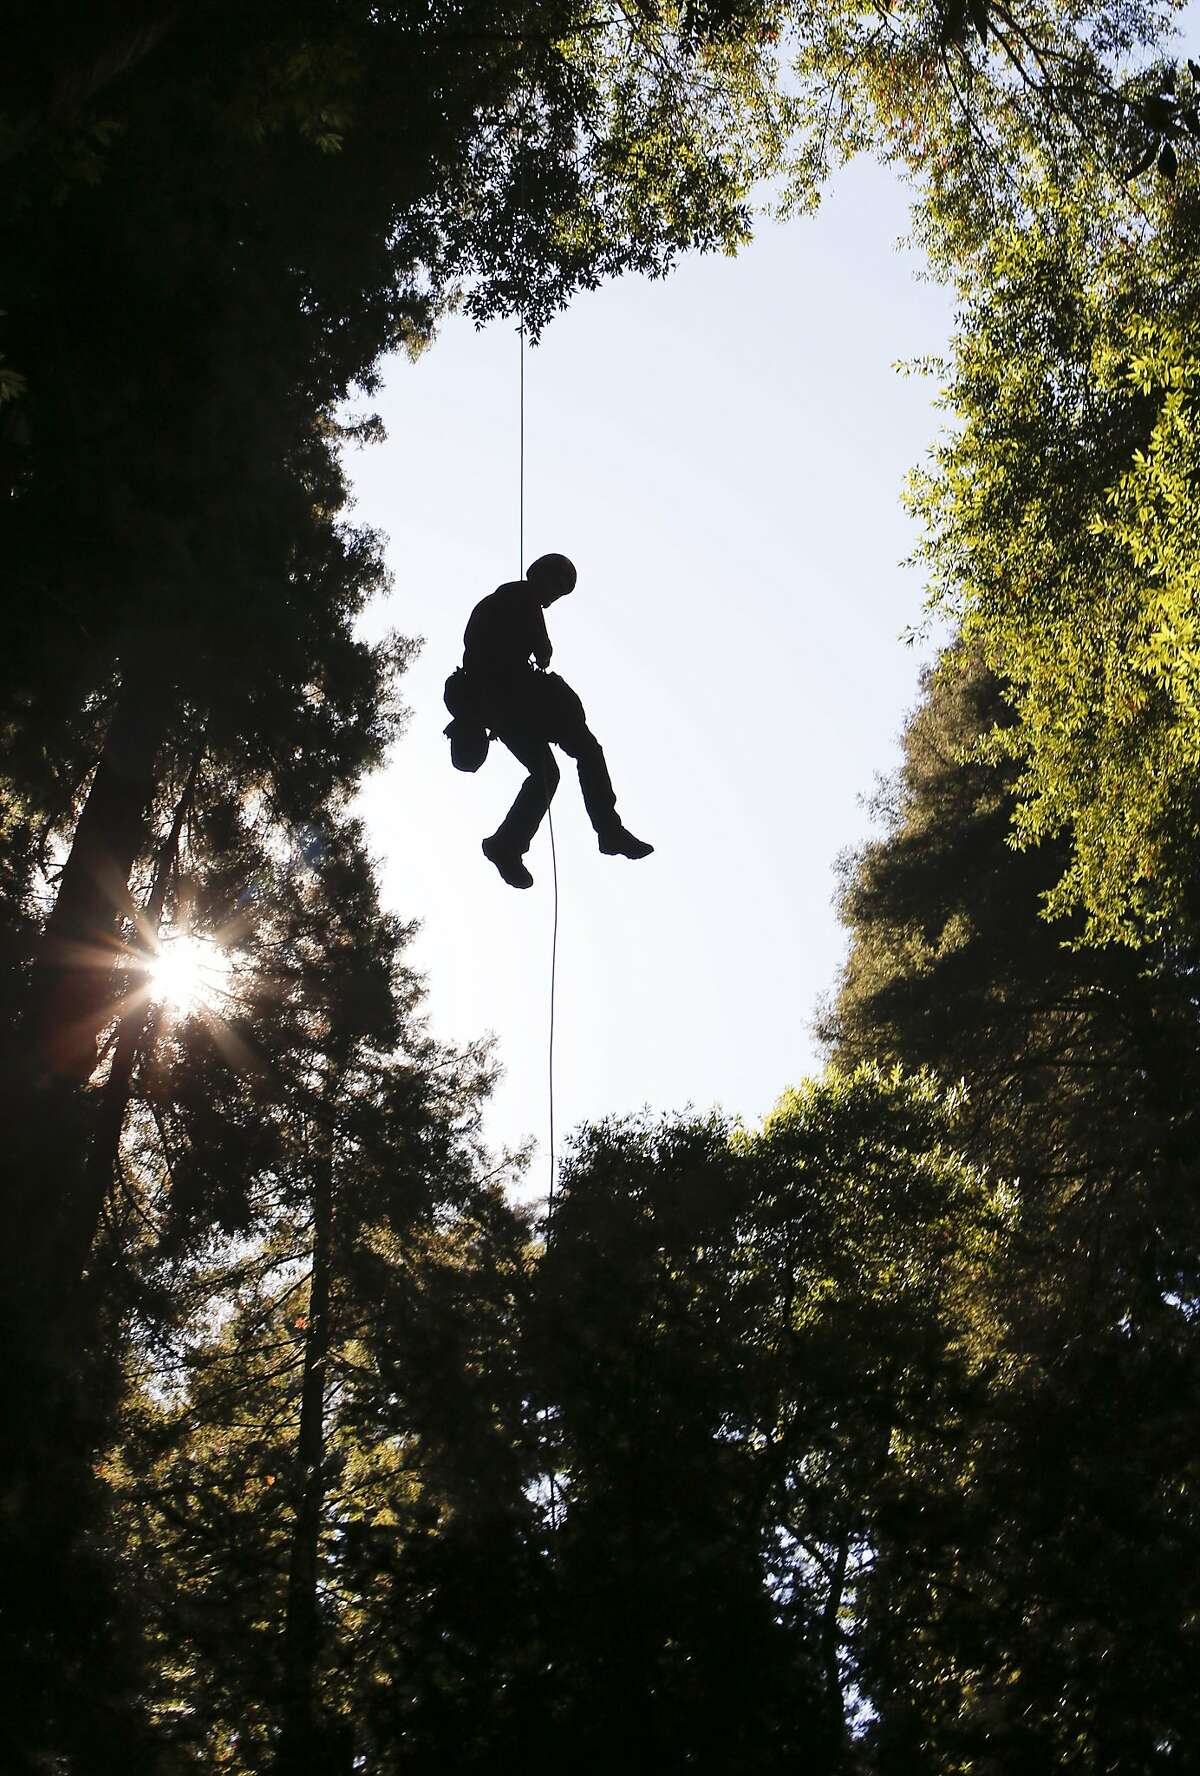 UC Berkeley graduate student Cameron Williams slowly returns from the tree canopy with samples at Henry Cowell Redwoods State Park in Felton , Calif., on Wednesday Oct. 1, 2014. A study by UC Berkeley researchers and San Francisco-based Save the Redwoods League is looking at whether or not the drought is hurting redwood, douglas fir and bay trees.